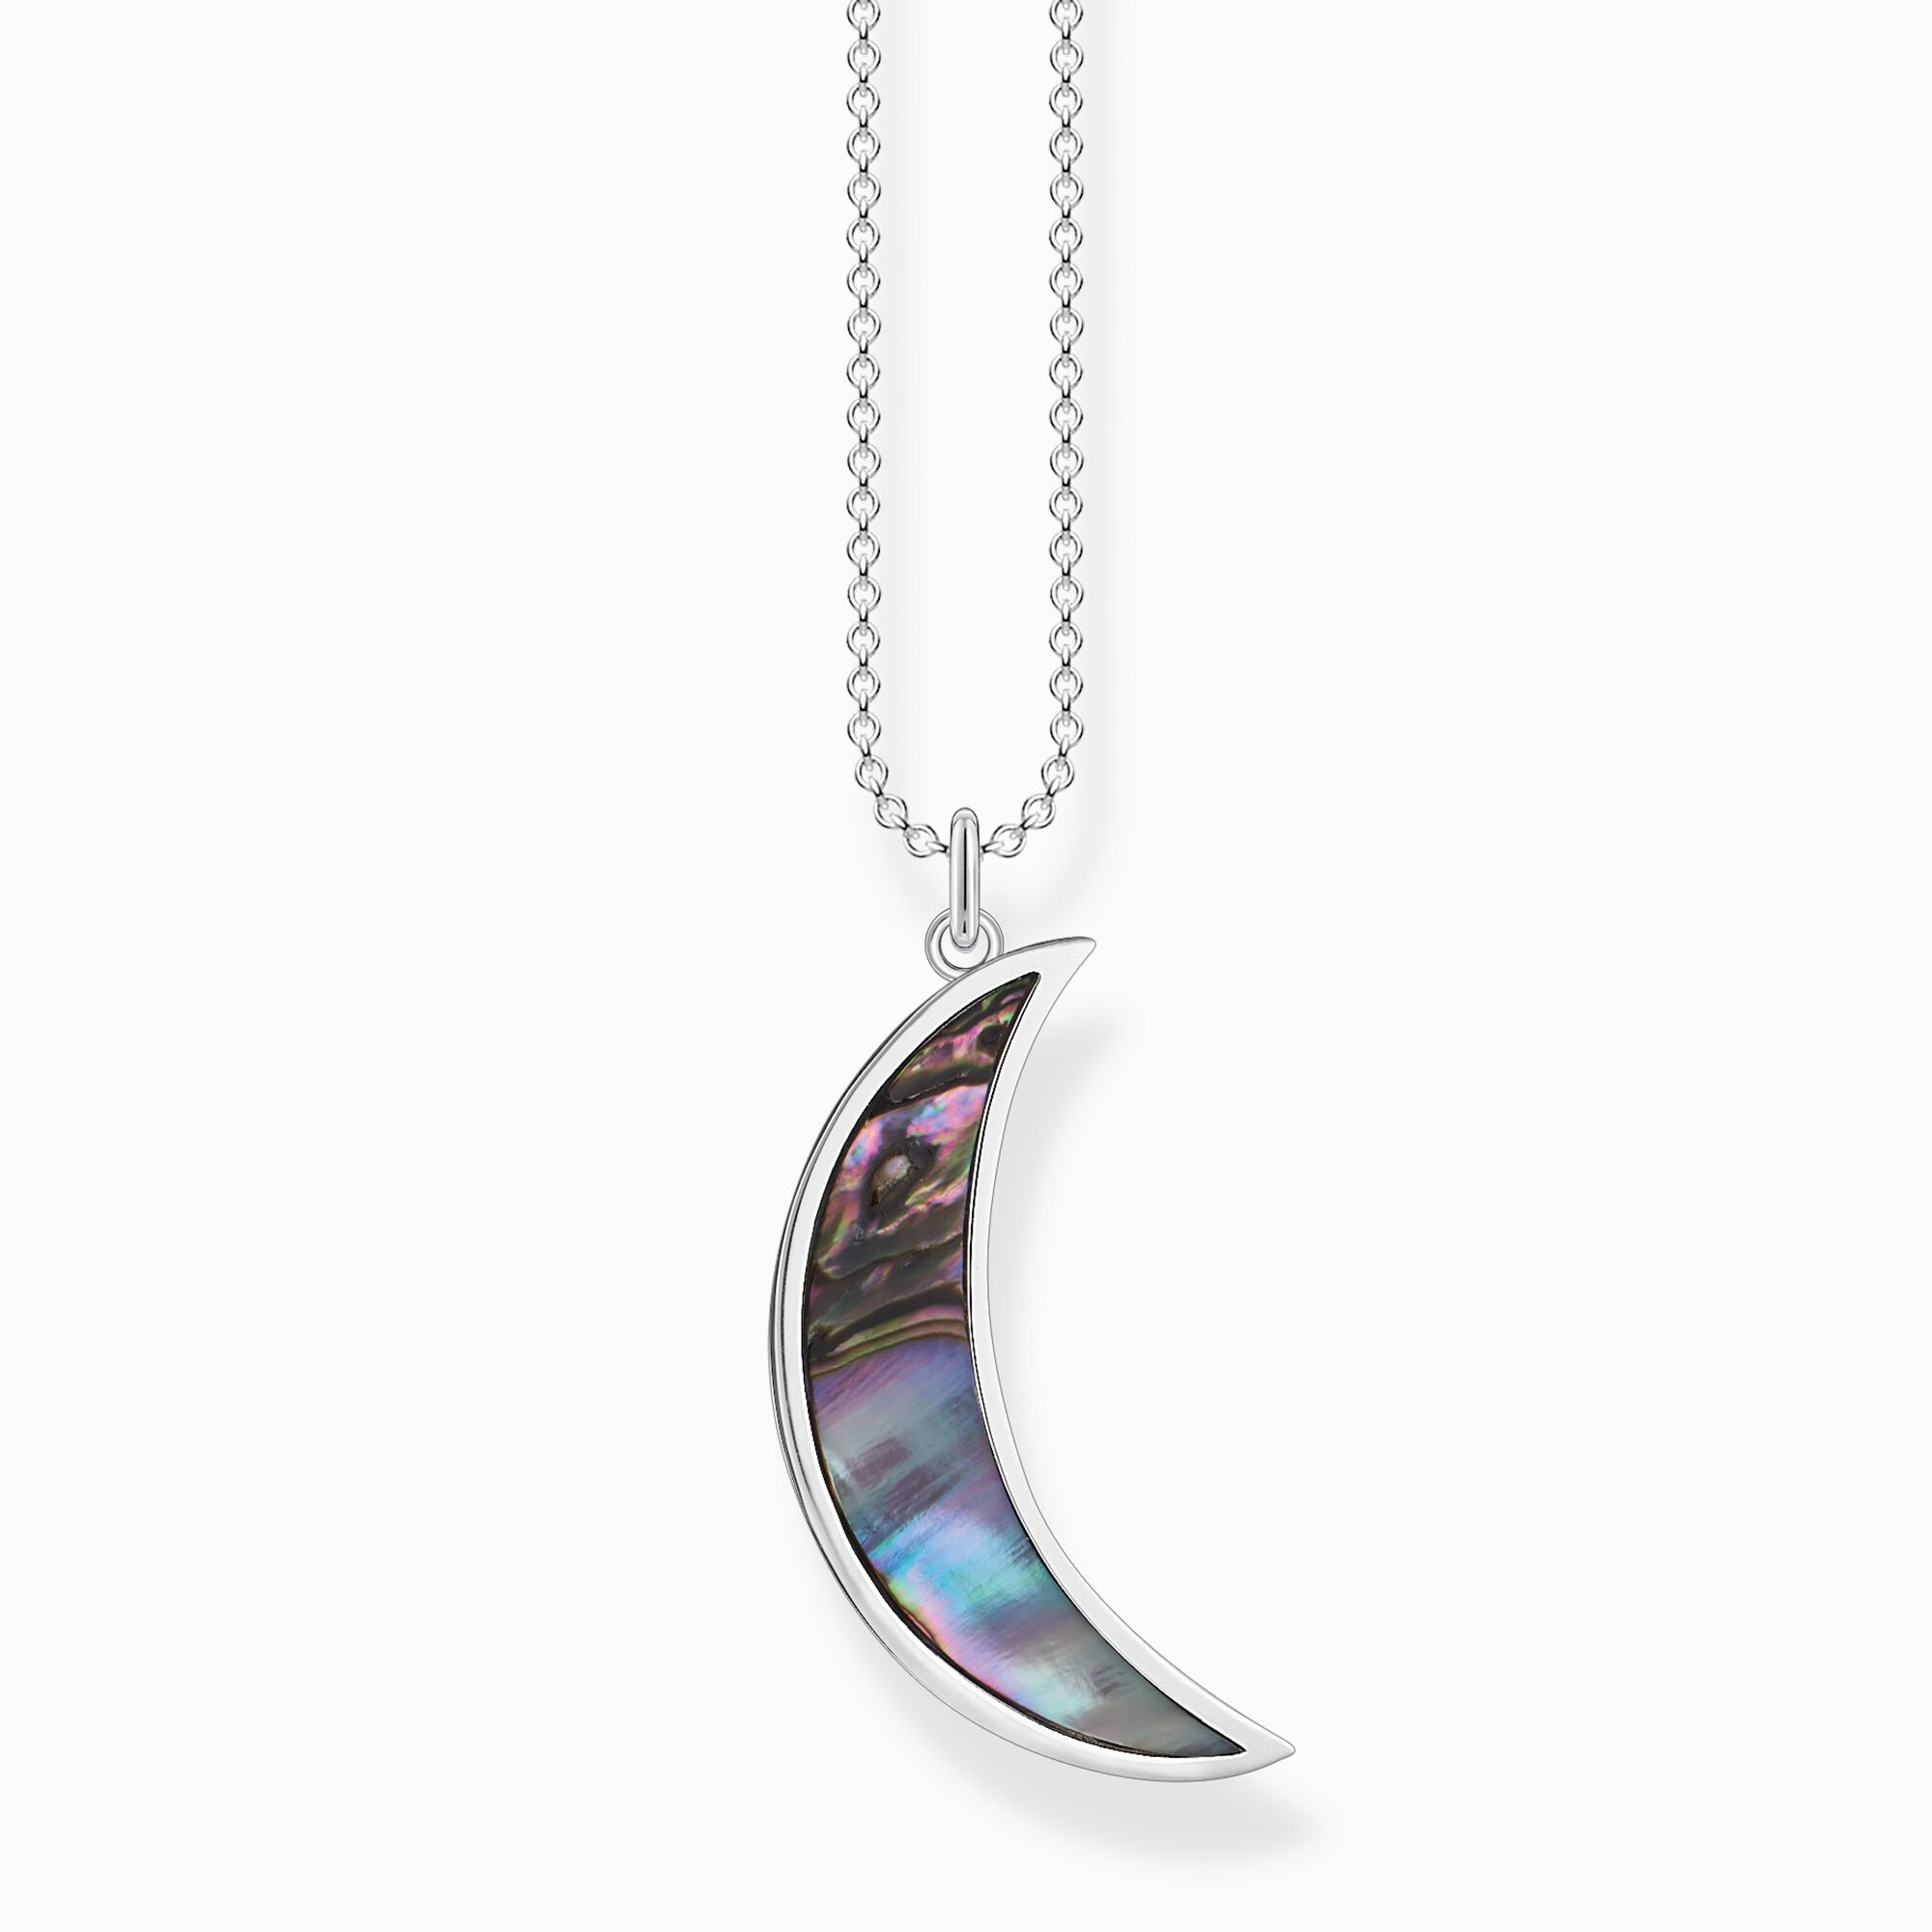 Necklace crescent moon abalone mother-of-pearl from the  collection in the THOMAS SABO online store